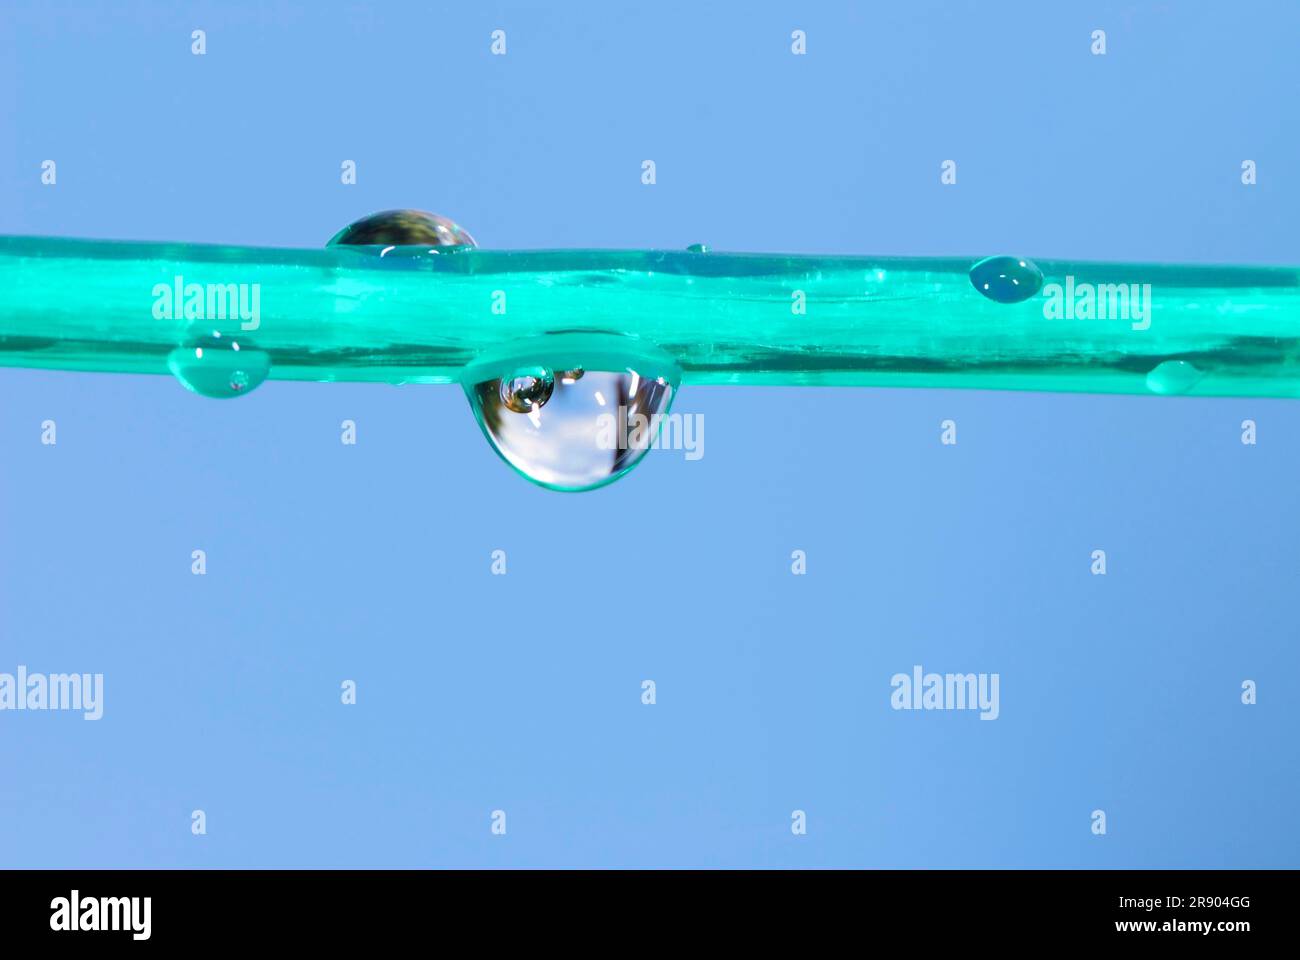 Water drops on a green cloathesline Stock Photo